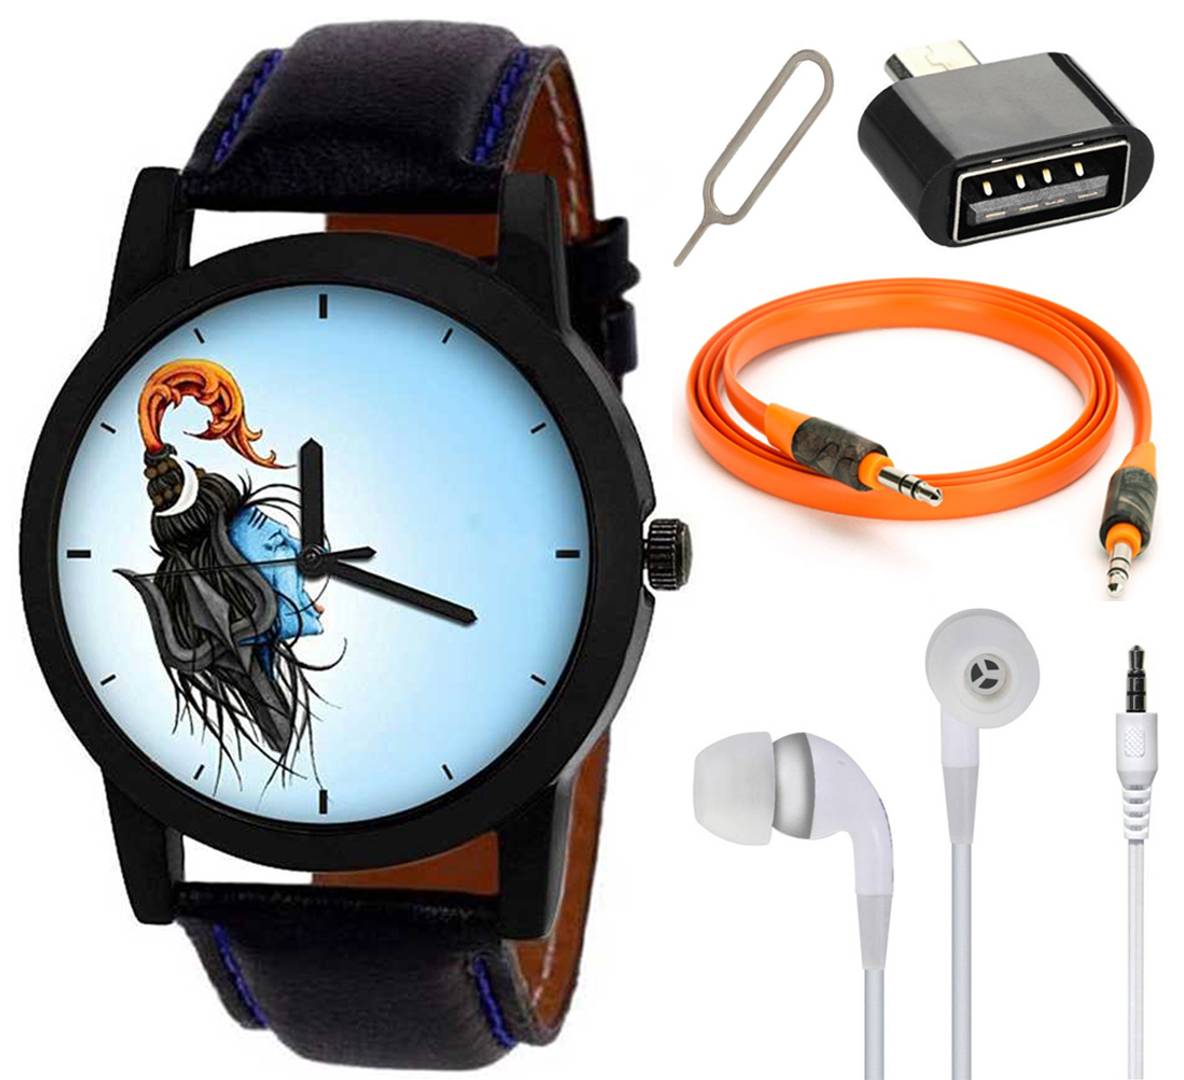 Combo of Jata-Mahadev Edition Analog Wrist Watch With Aux Cable , OTG Adapter And Earphone Without Mic